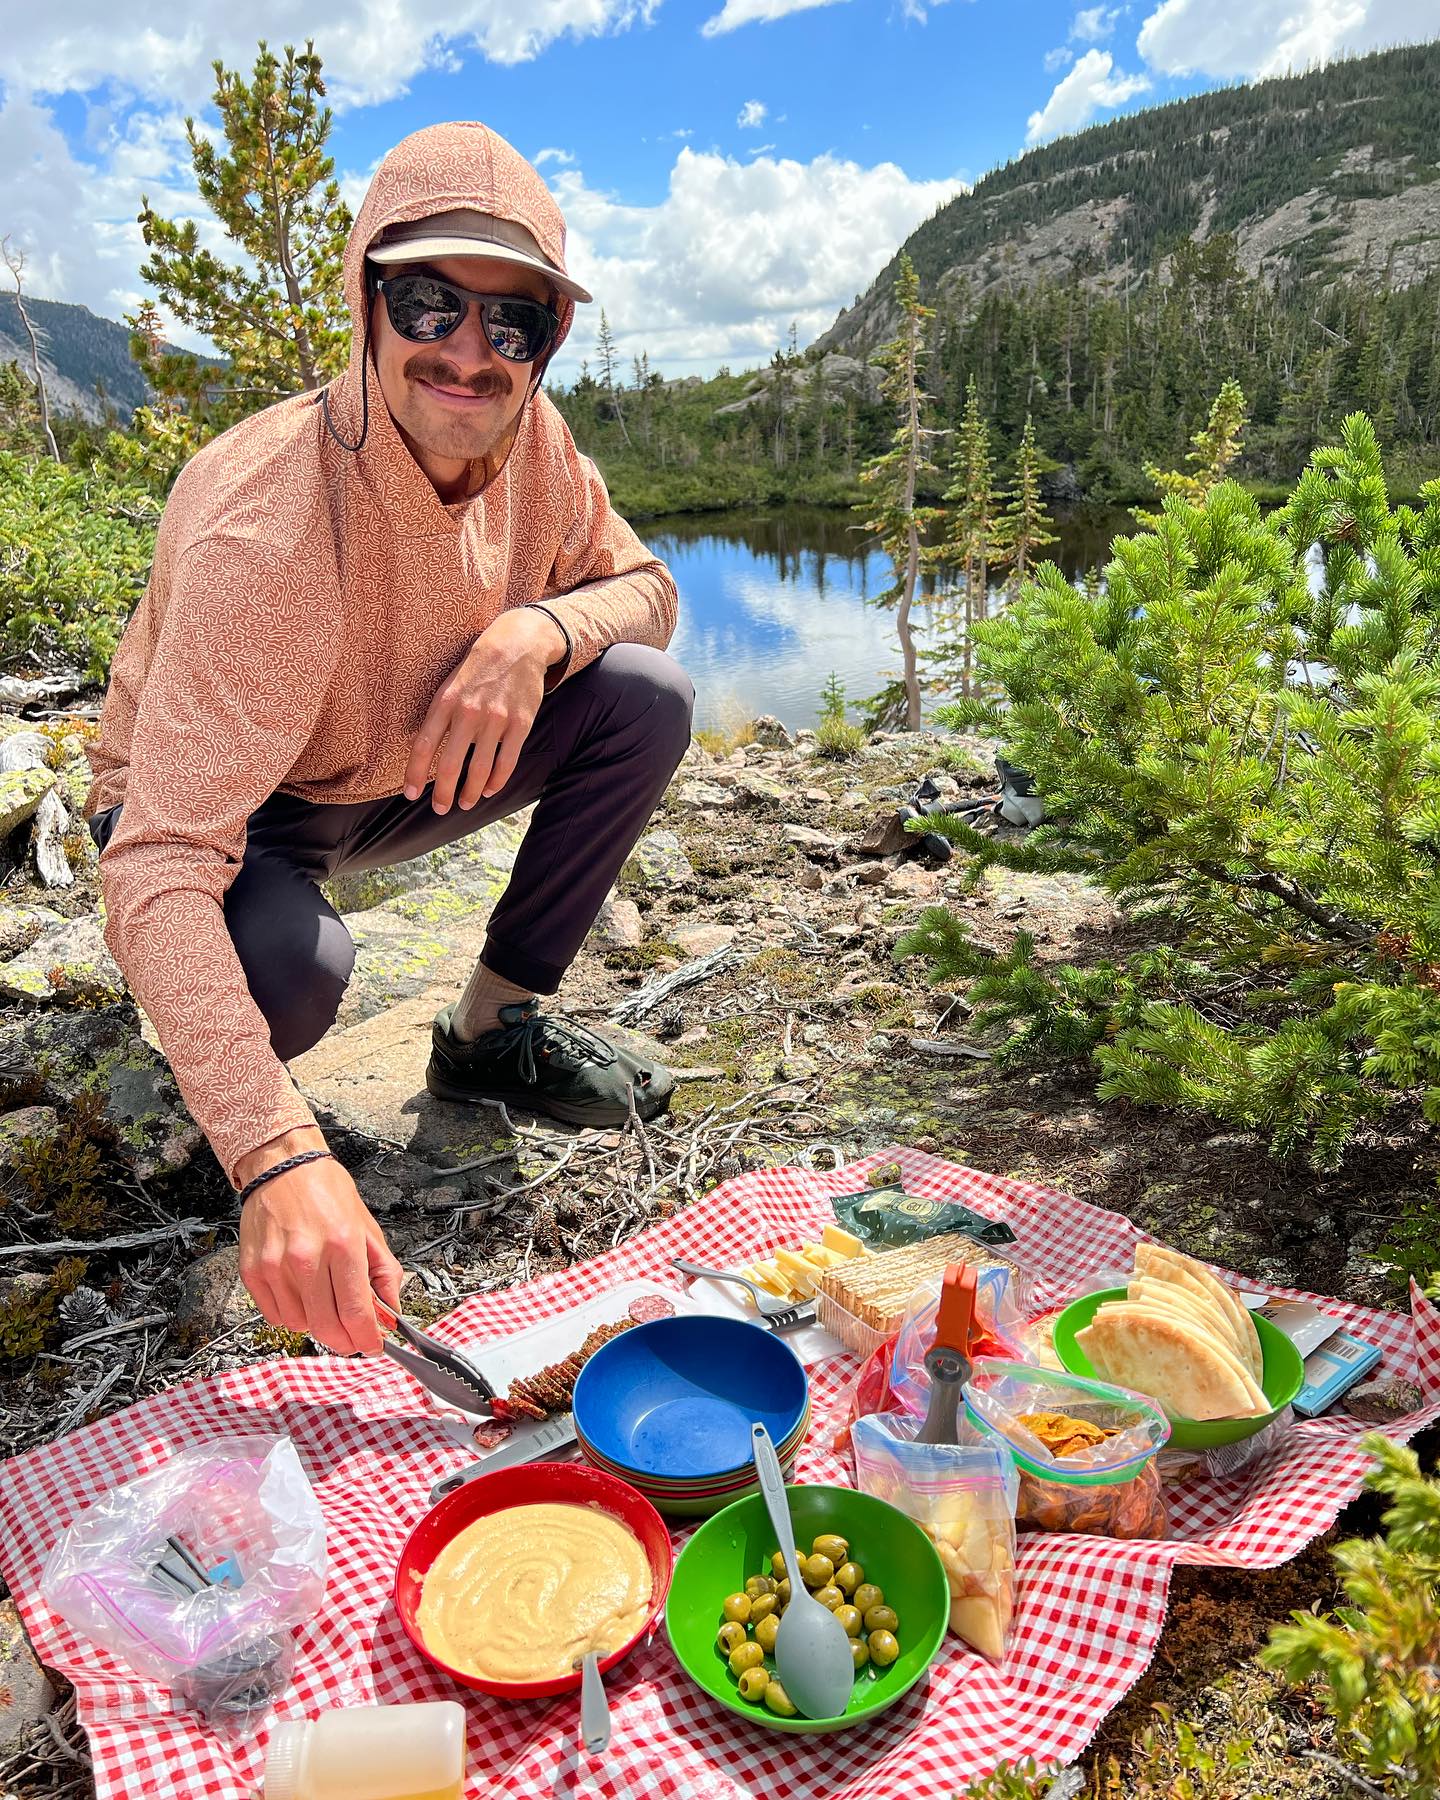 Wildland guide serves up backcountry meal